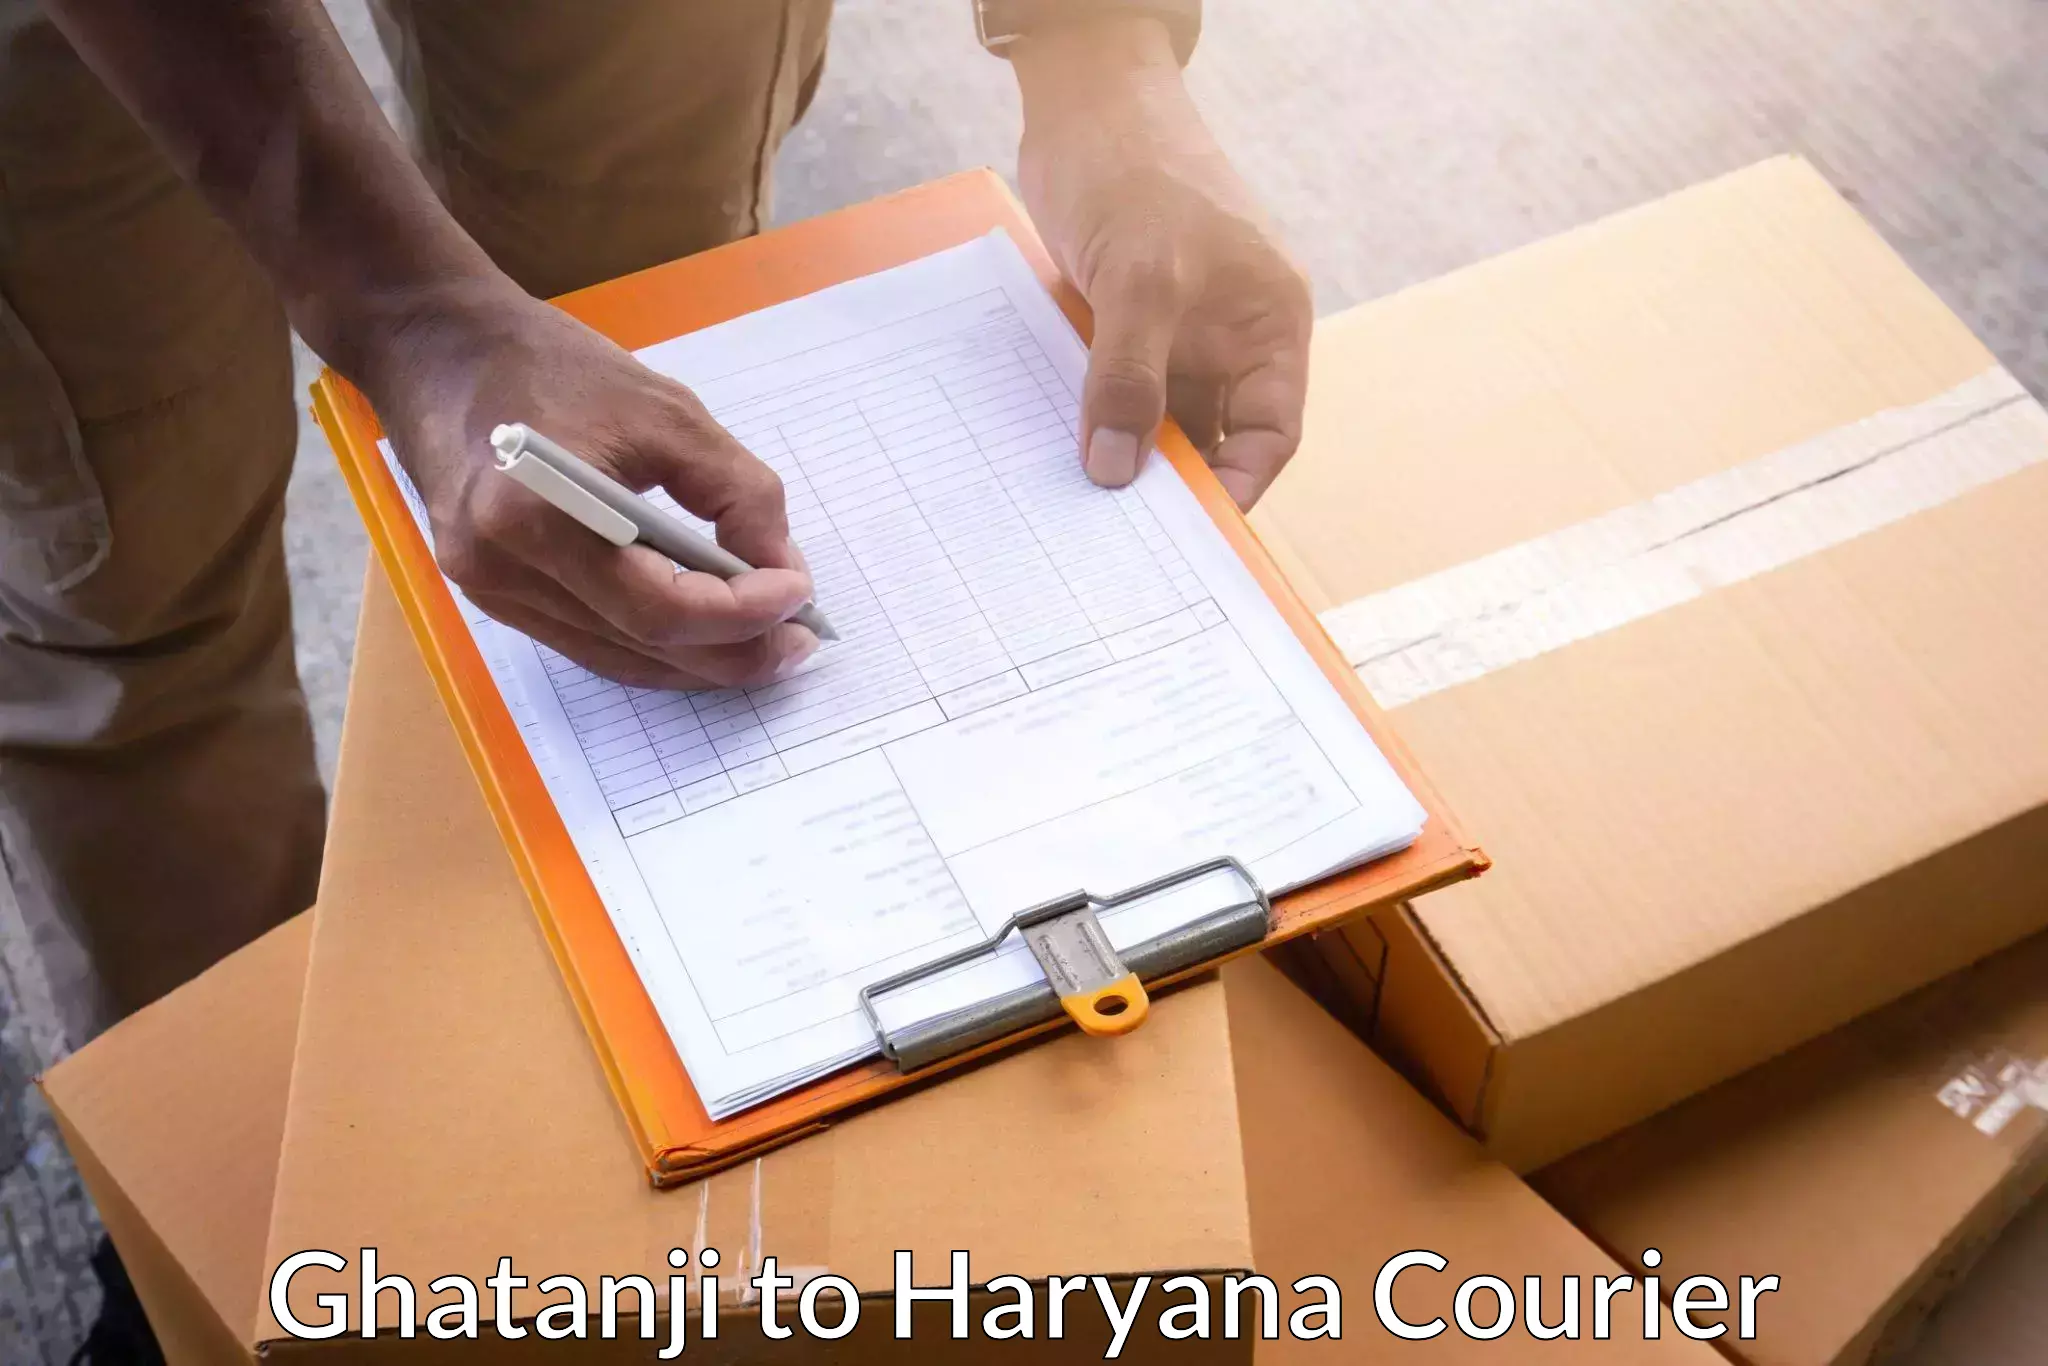 End-to-end delivery Ghatanji to Gurgaon